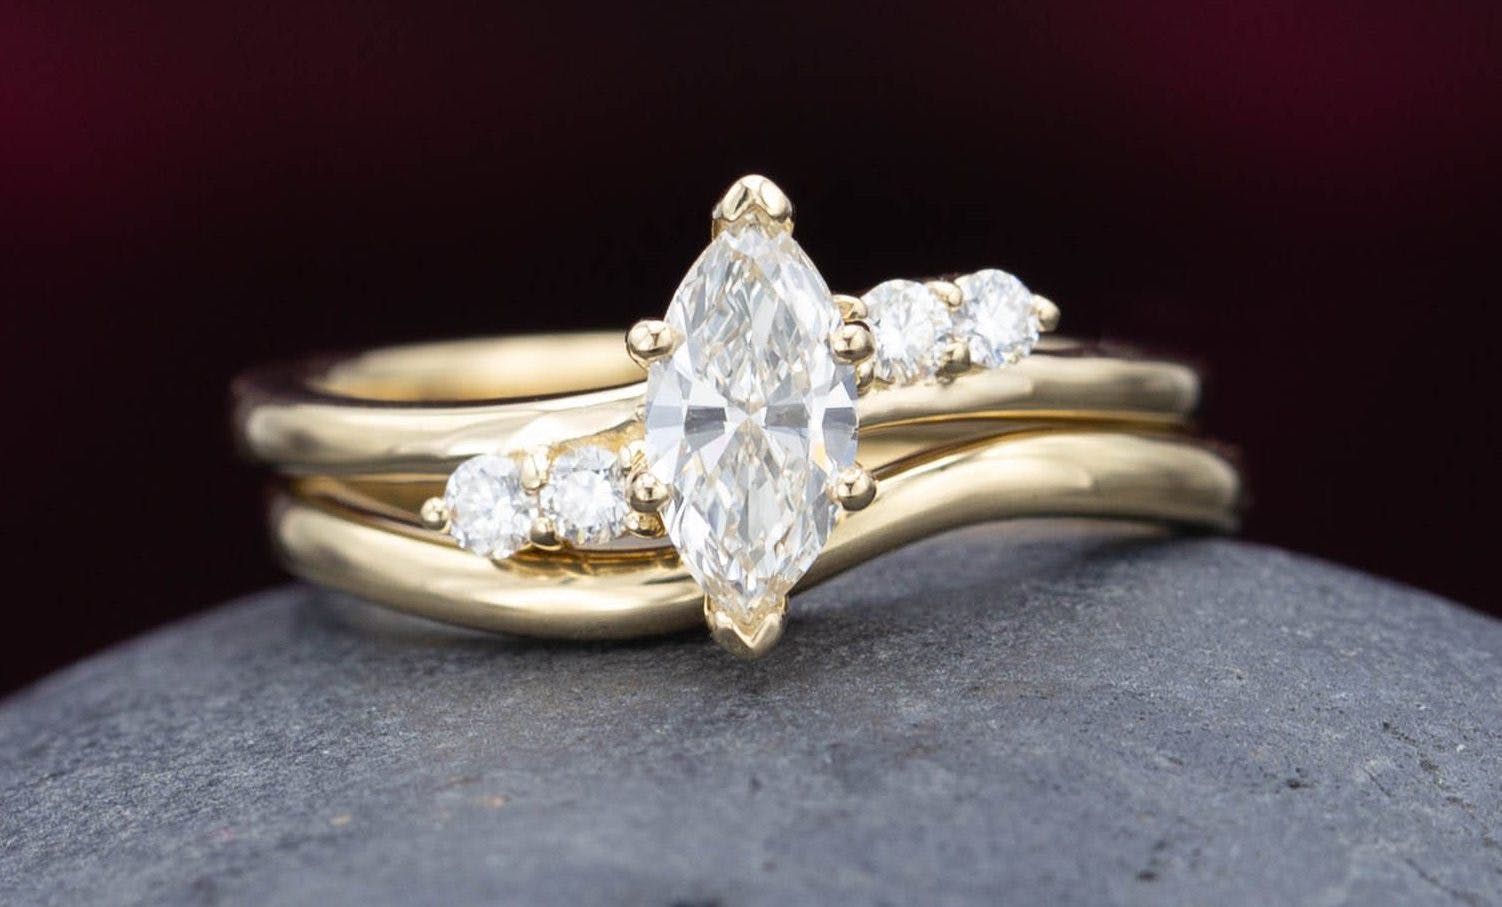 Marquise-Cut Diamonds Buying Guide: Vintage & Modern